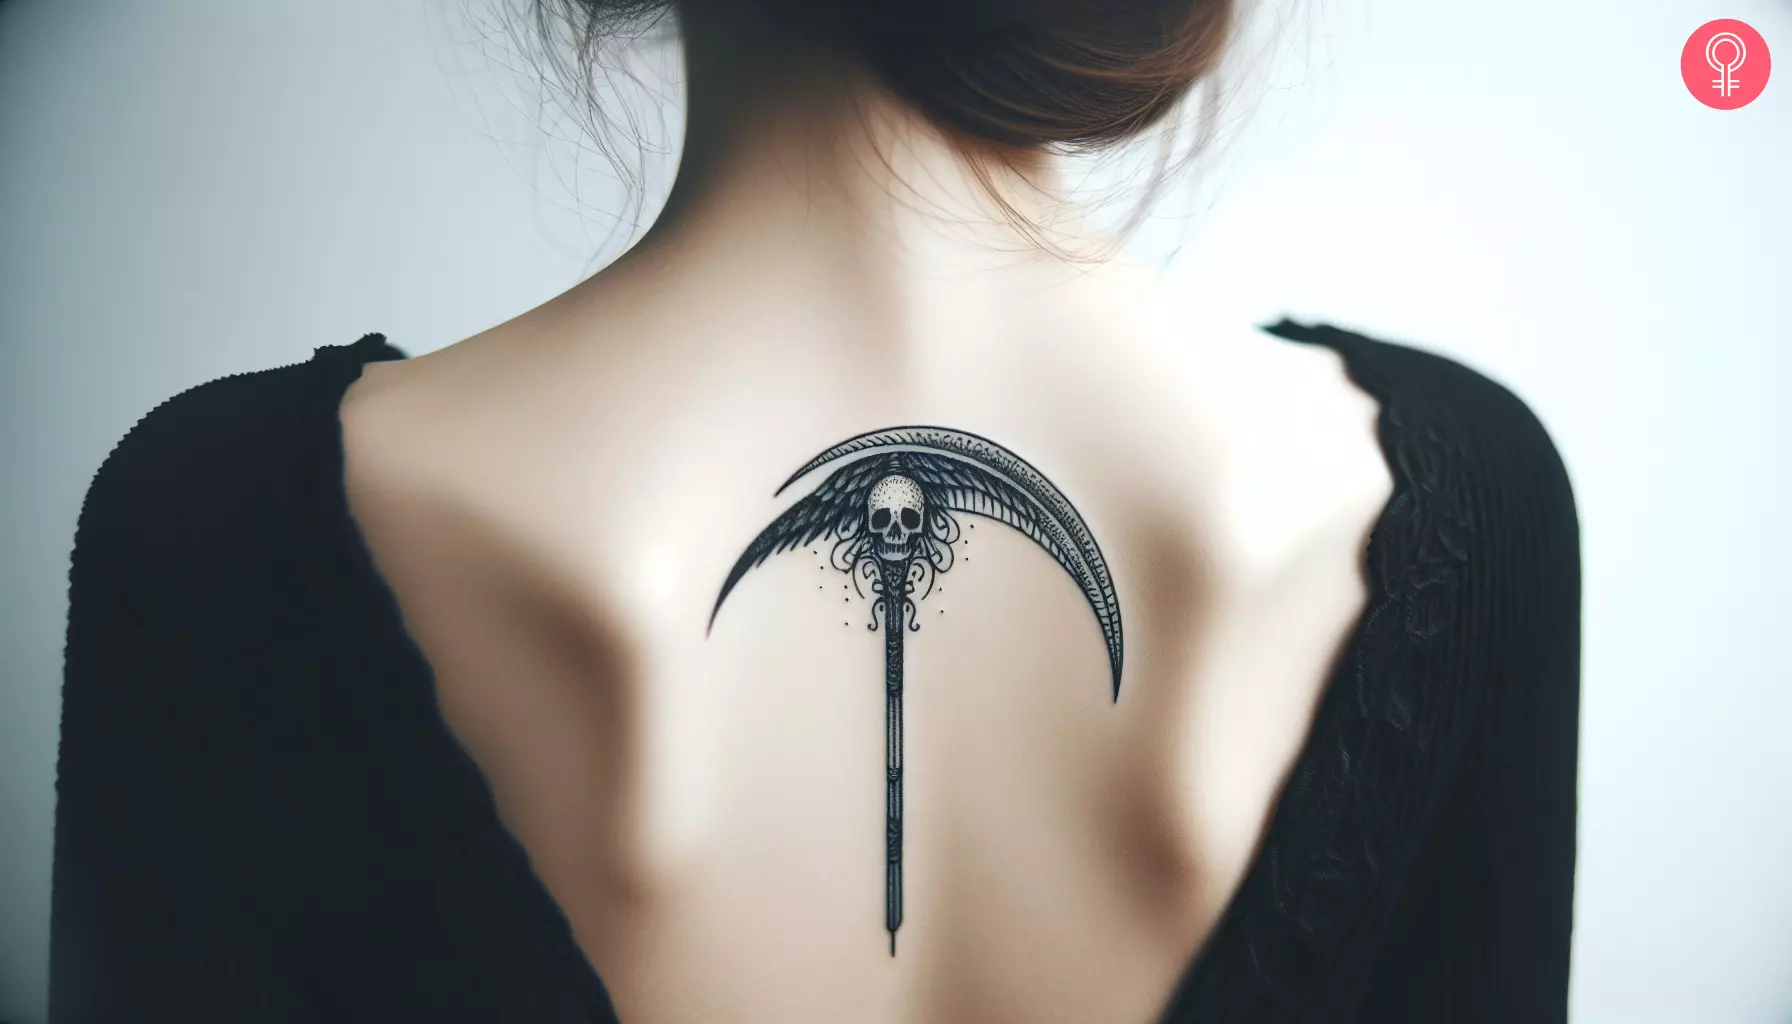 An artistic image of a scythe tattoo with a skull on the back